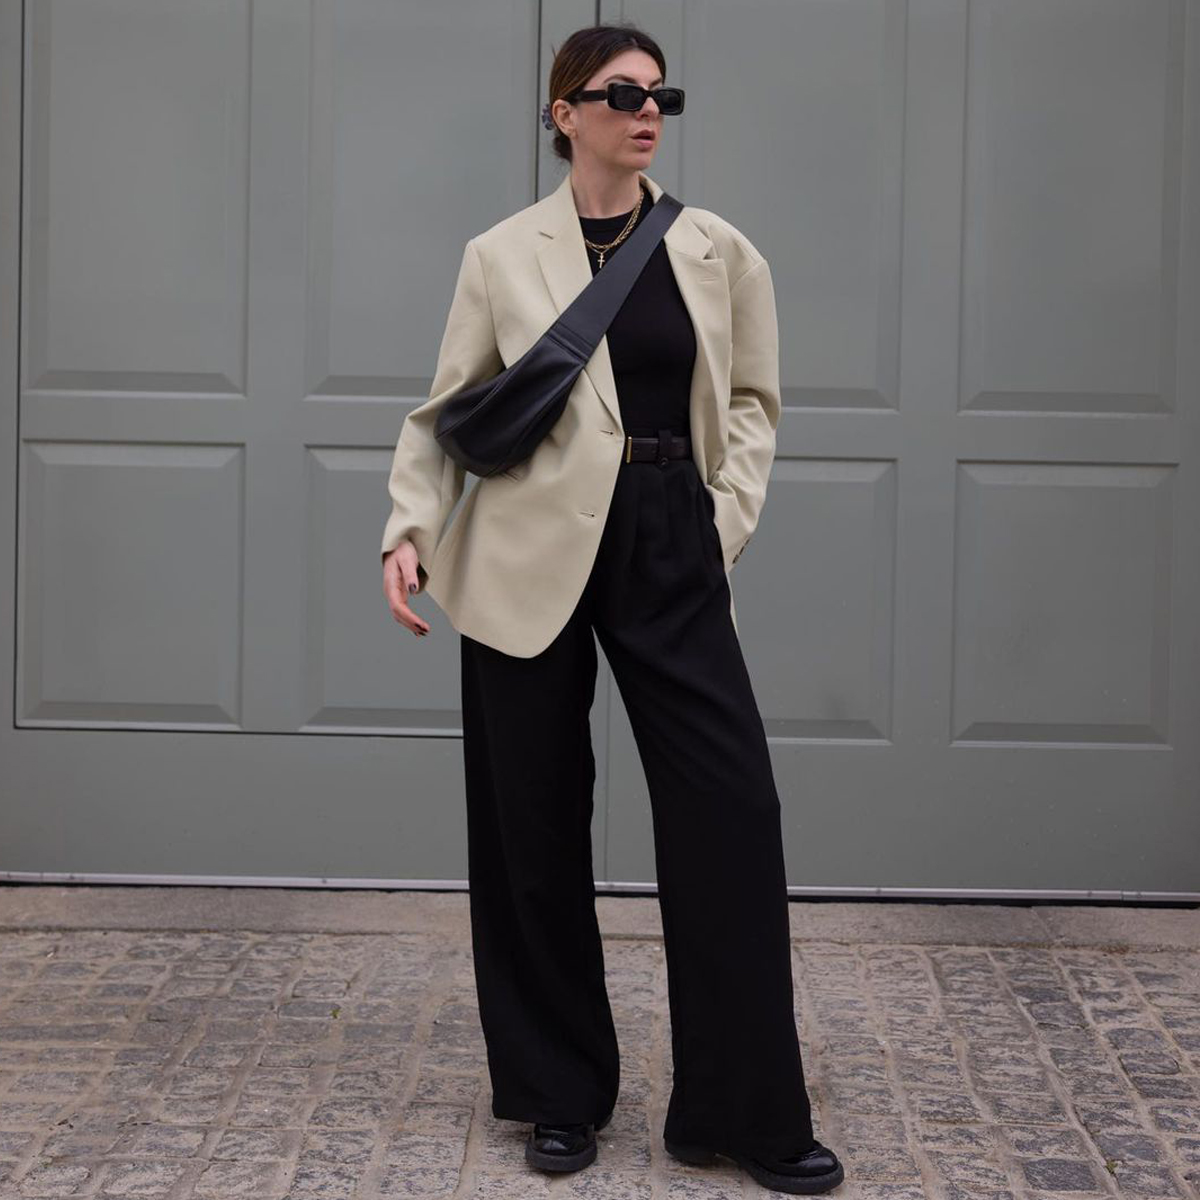 The Best Black Trousers for Women, As Chosen By an Editor